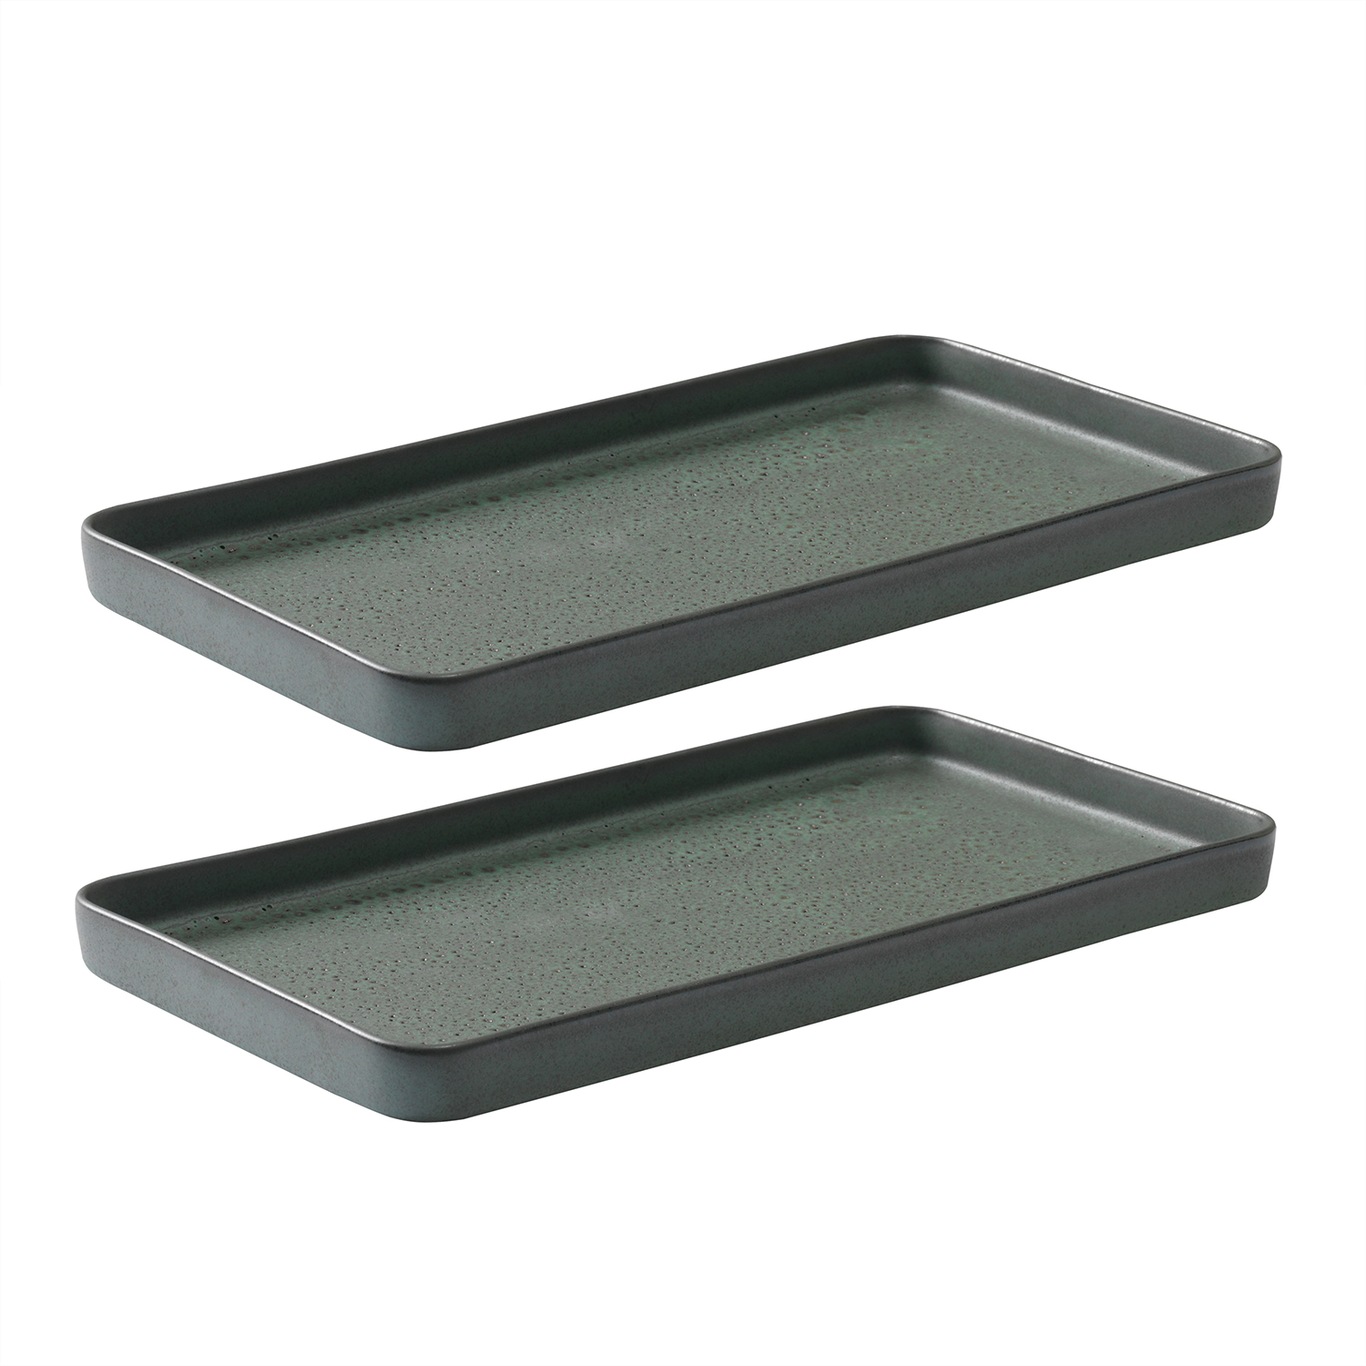 Raw Dishes Northern Green, 2-pack